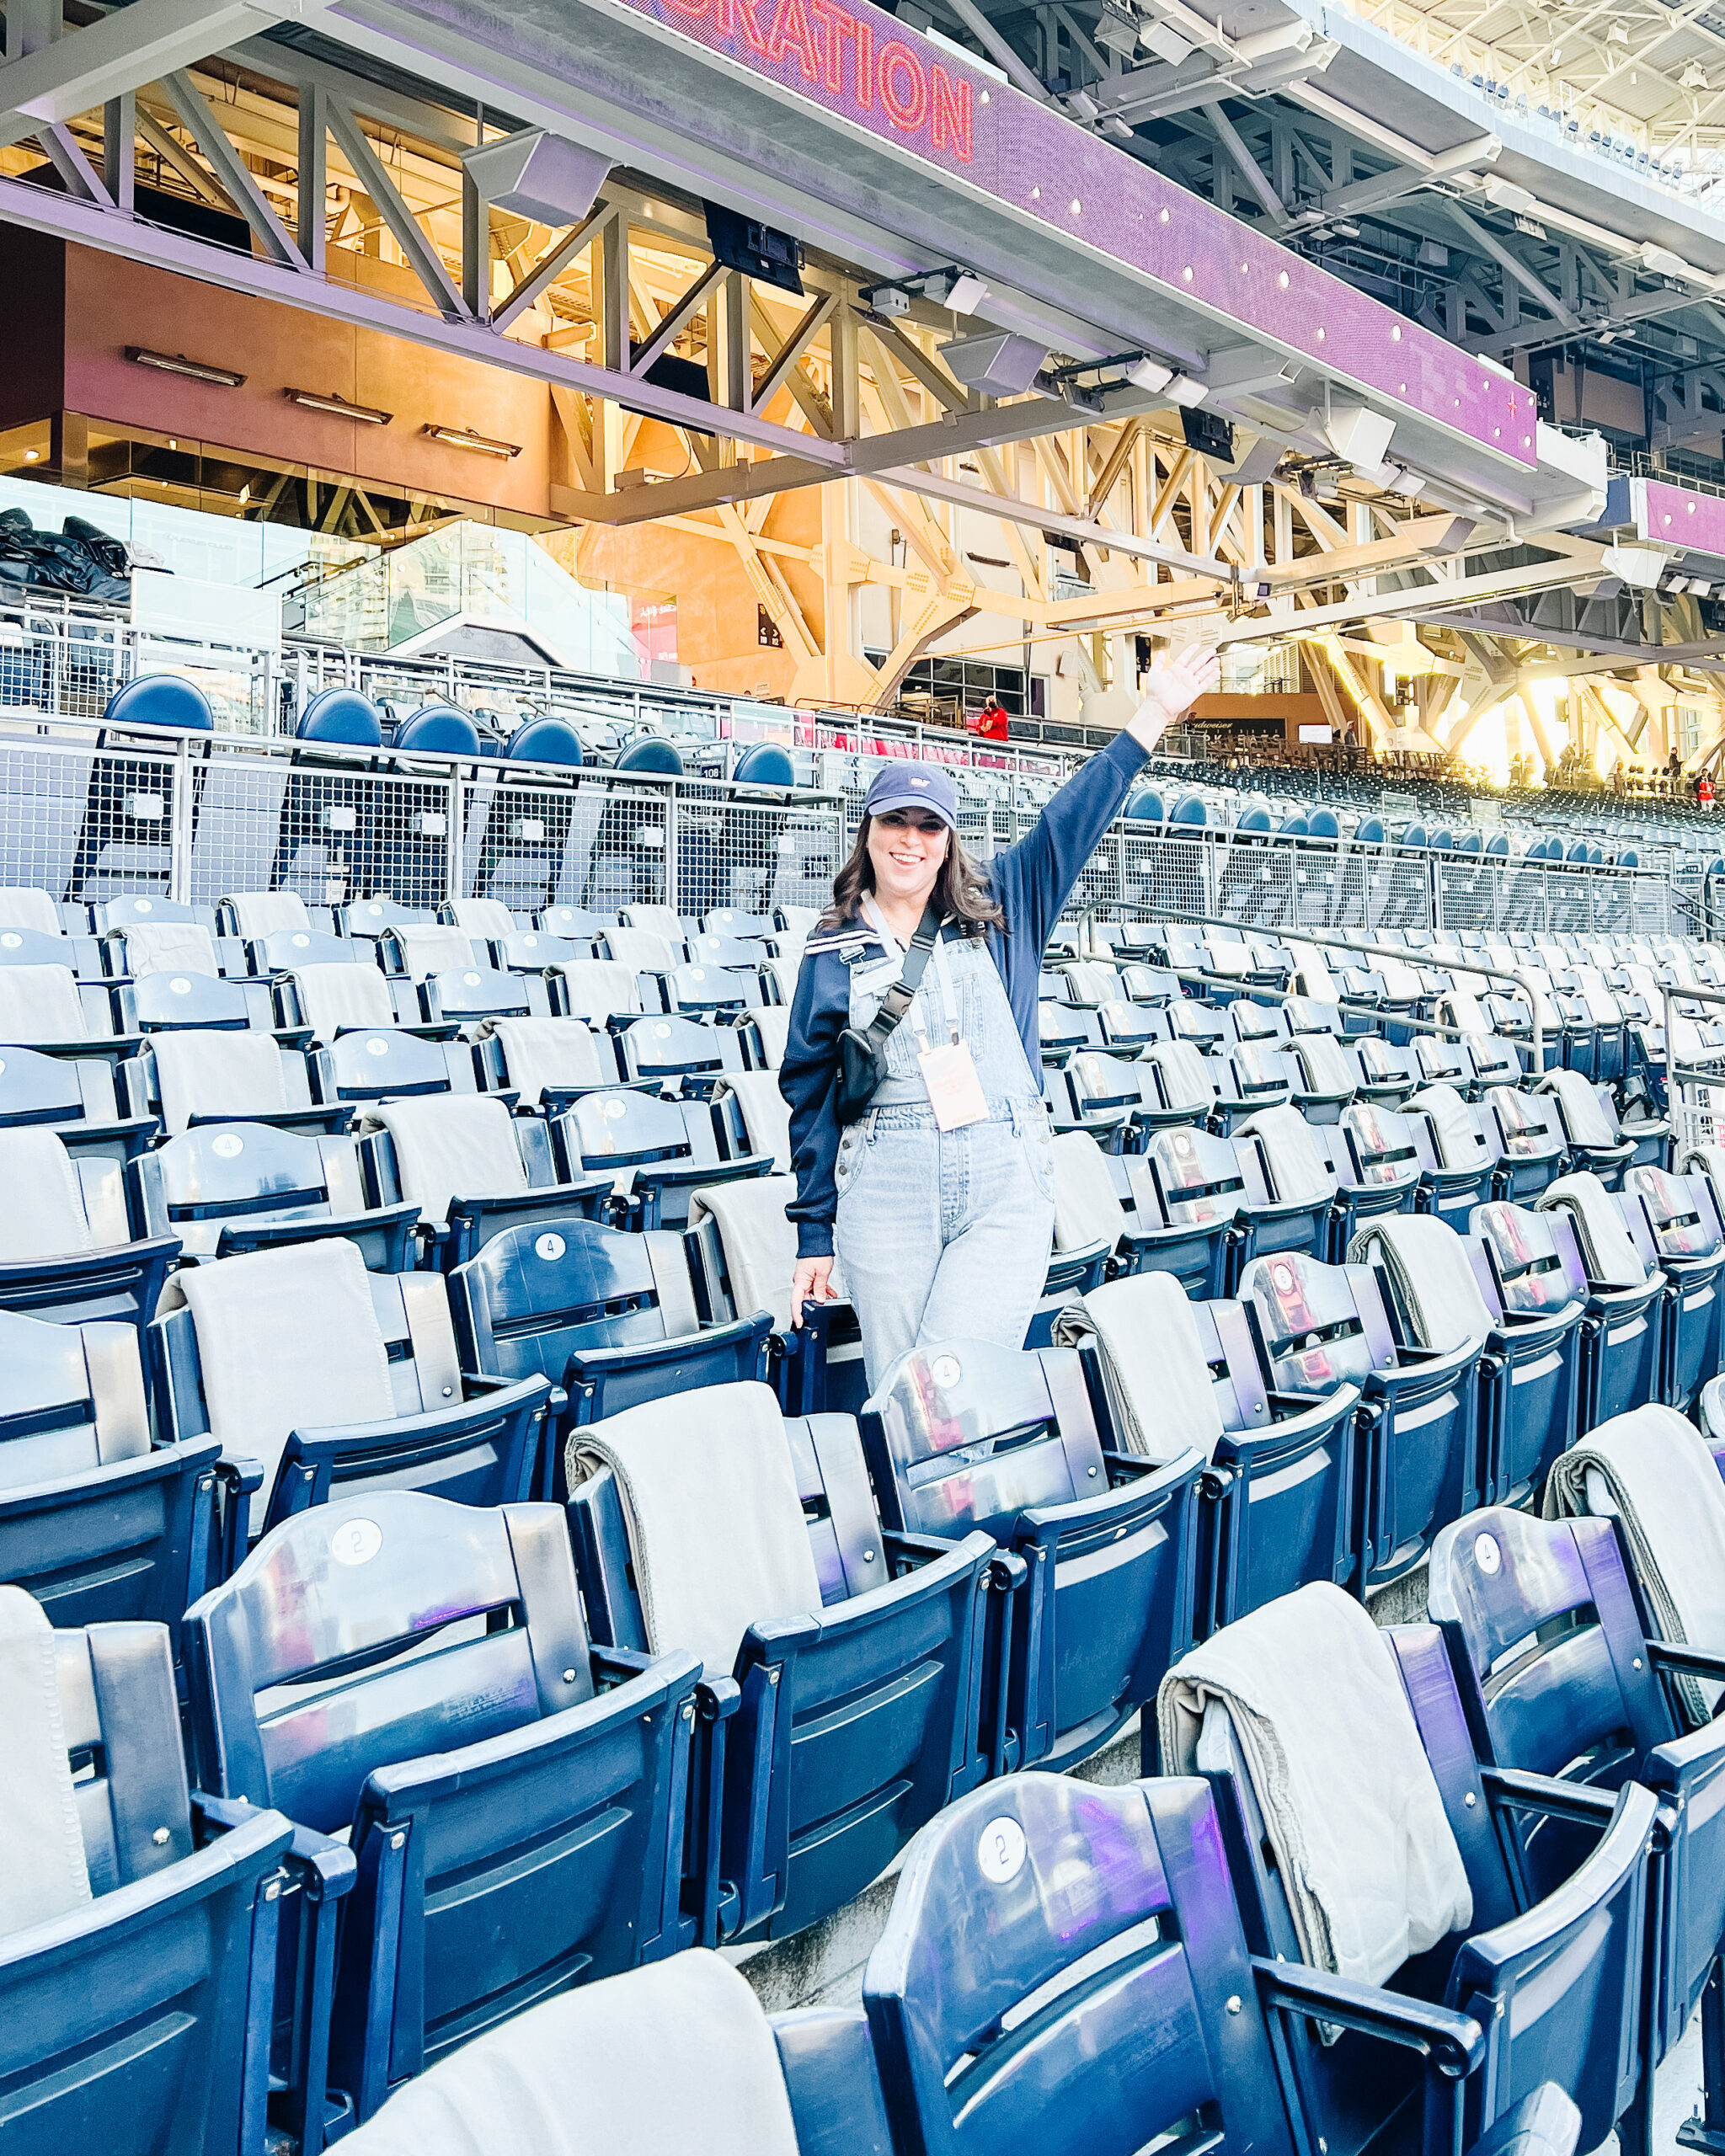 Brittney Naylor wearing overalls and ball cap with hands in the air standing in the stands at Petco Park in San Diego